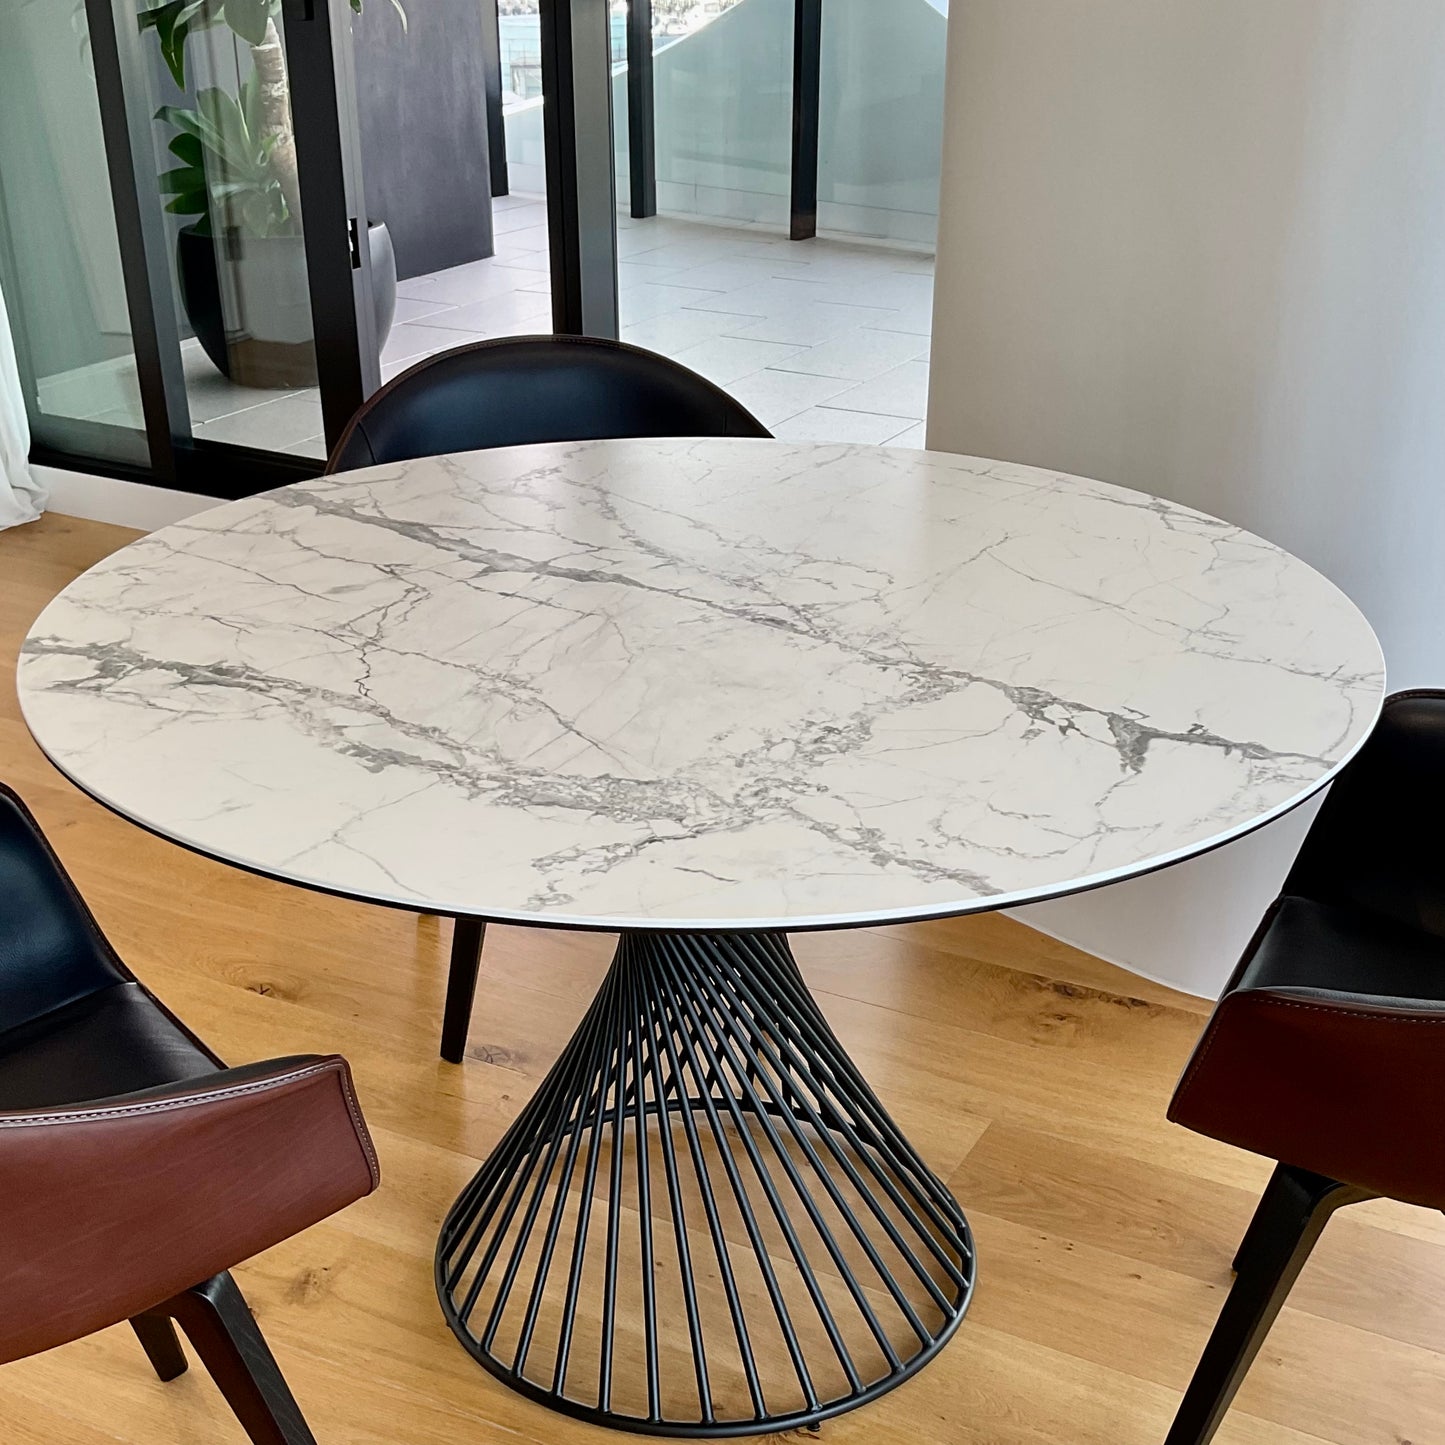 Load image into Gallery viewer, Vortex Round Dining Table by Calligaris through Voyager
